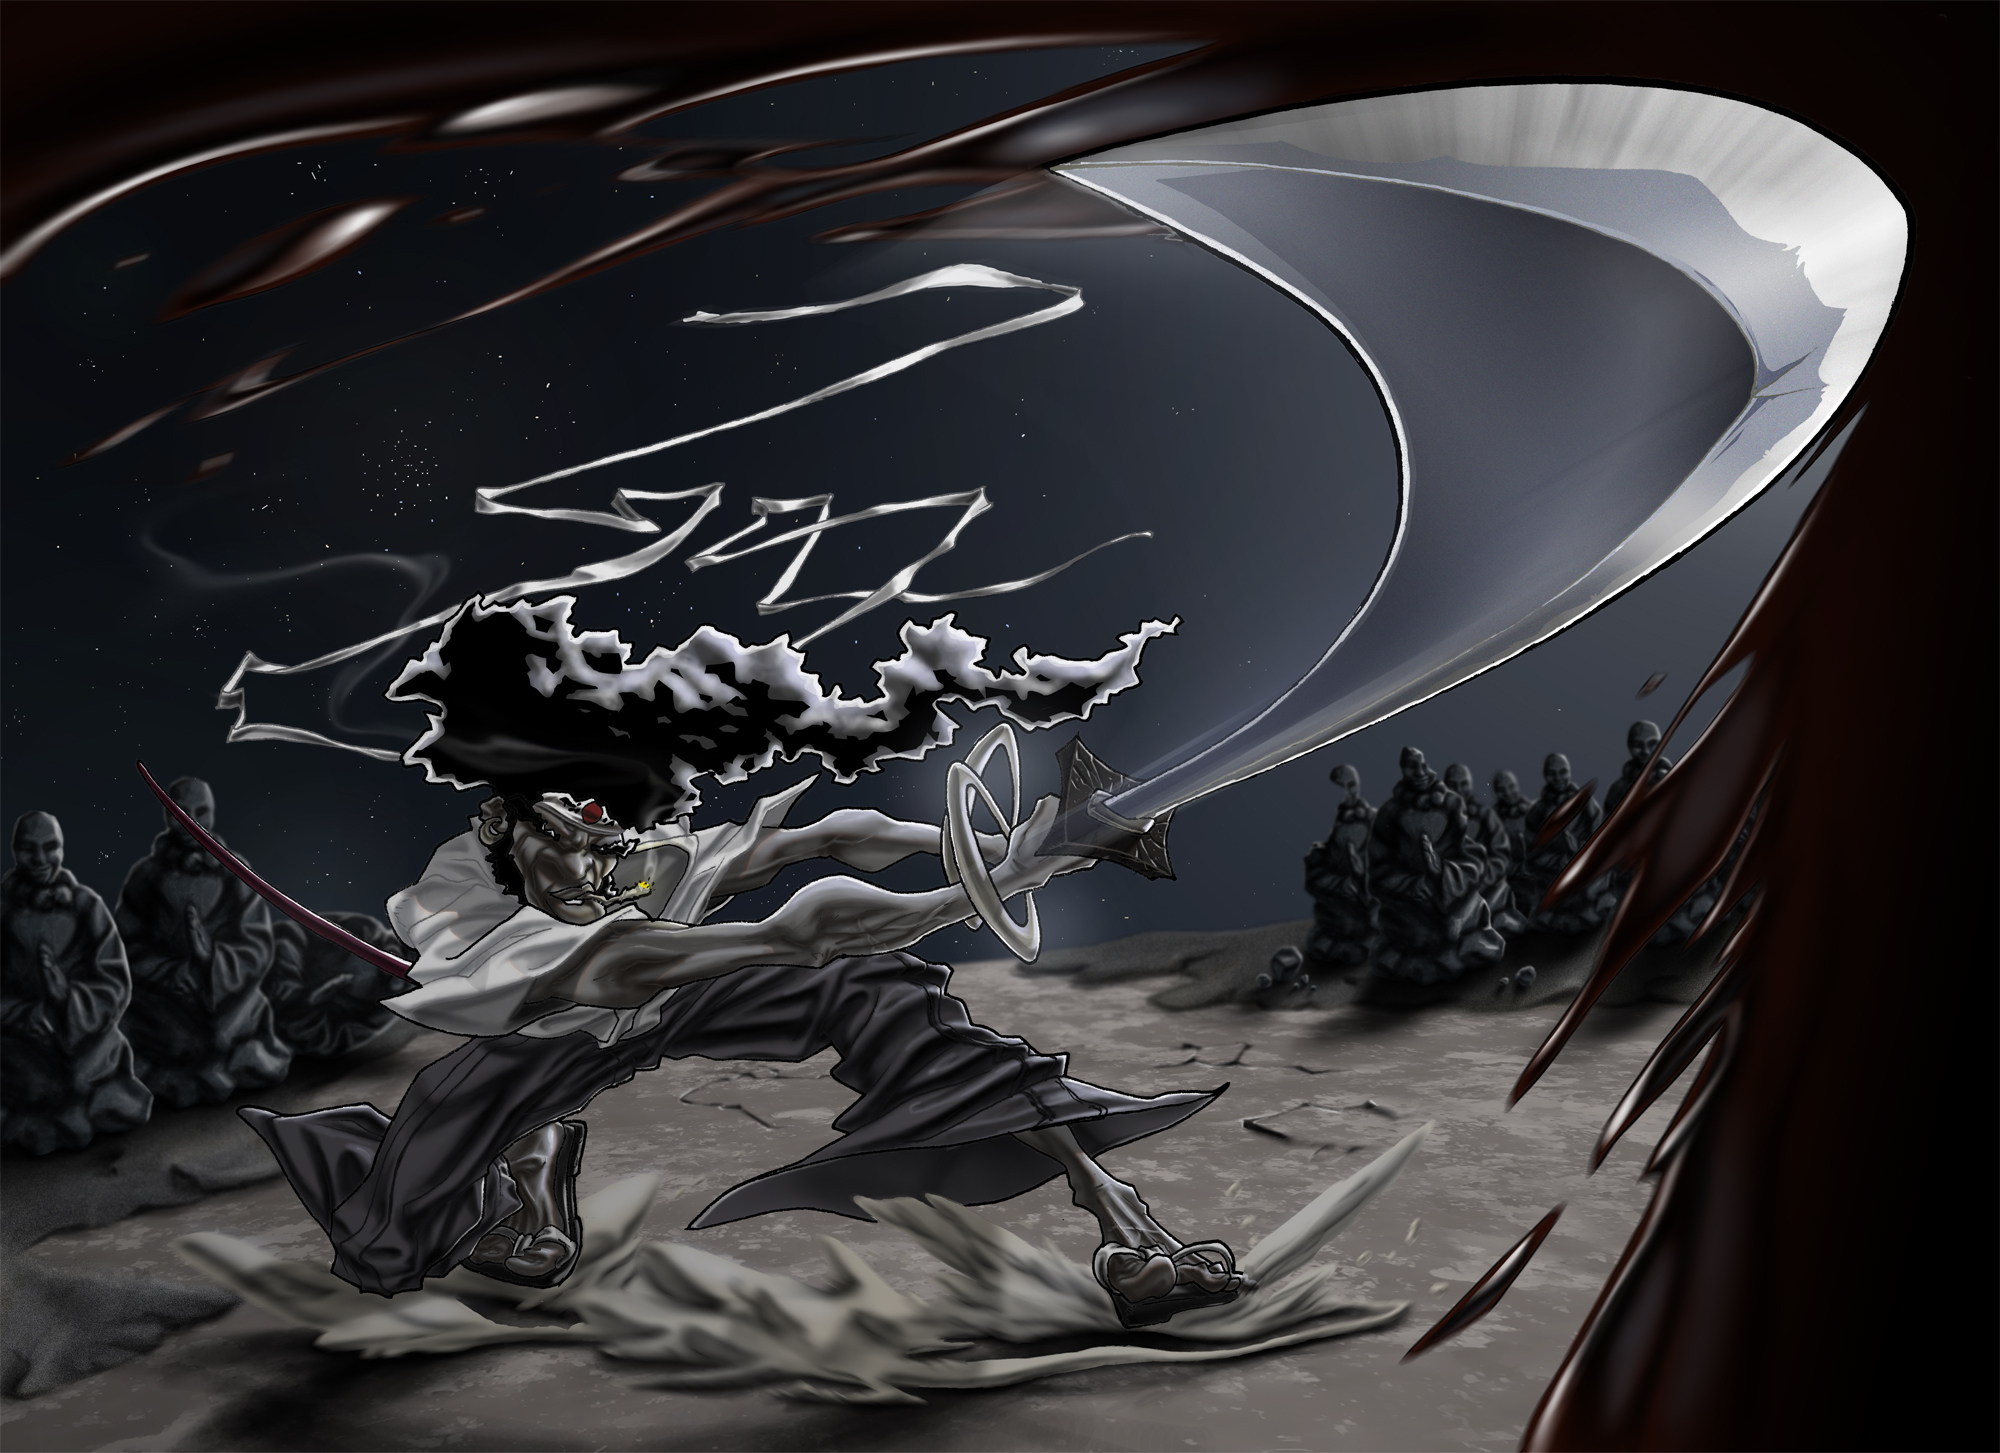 Afro Samurai Wallpapers Images Photos Pictures Backgrounds